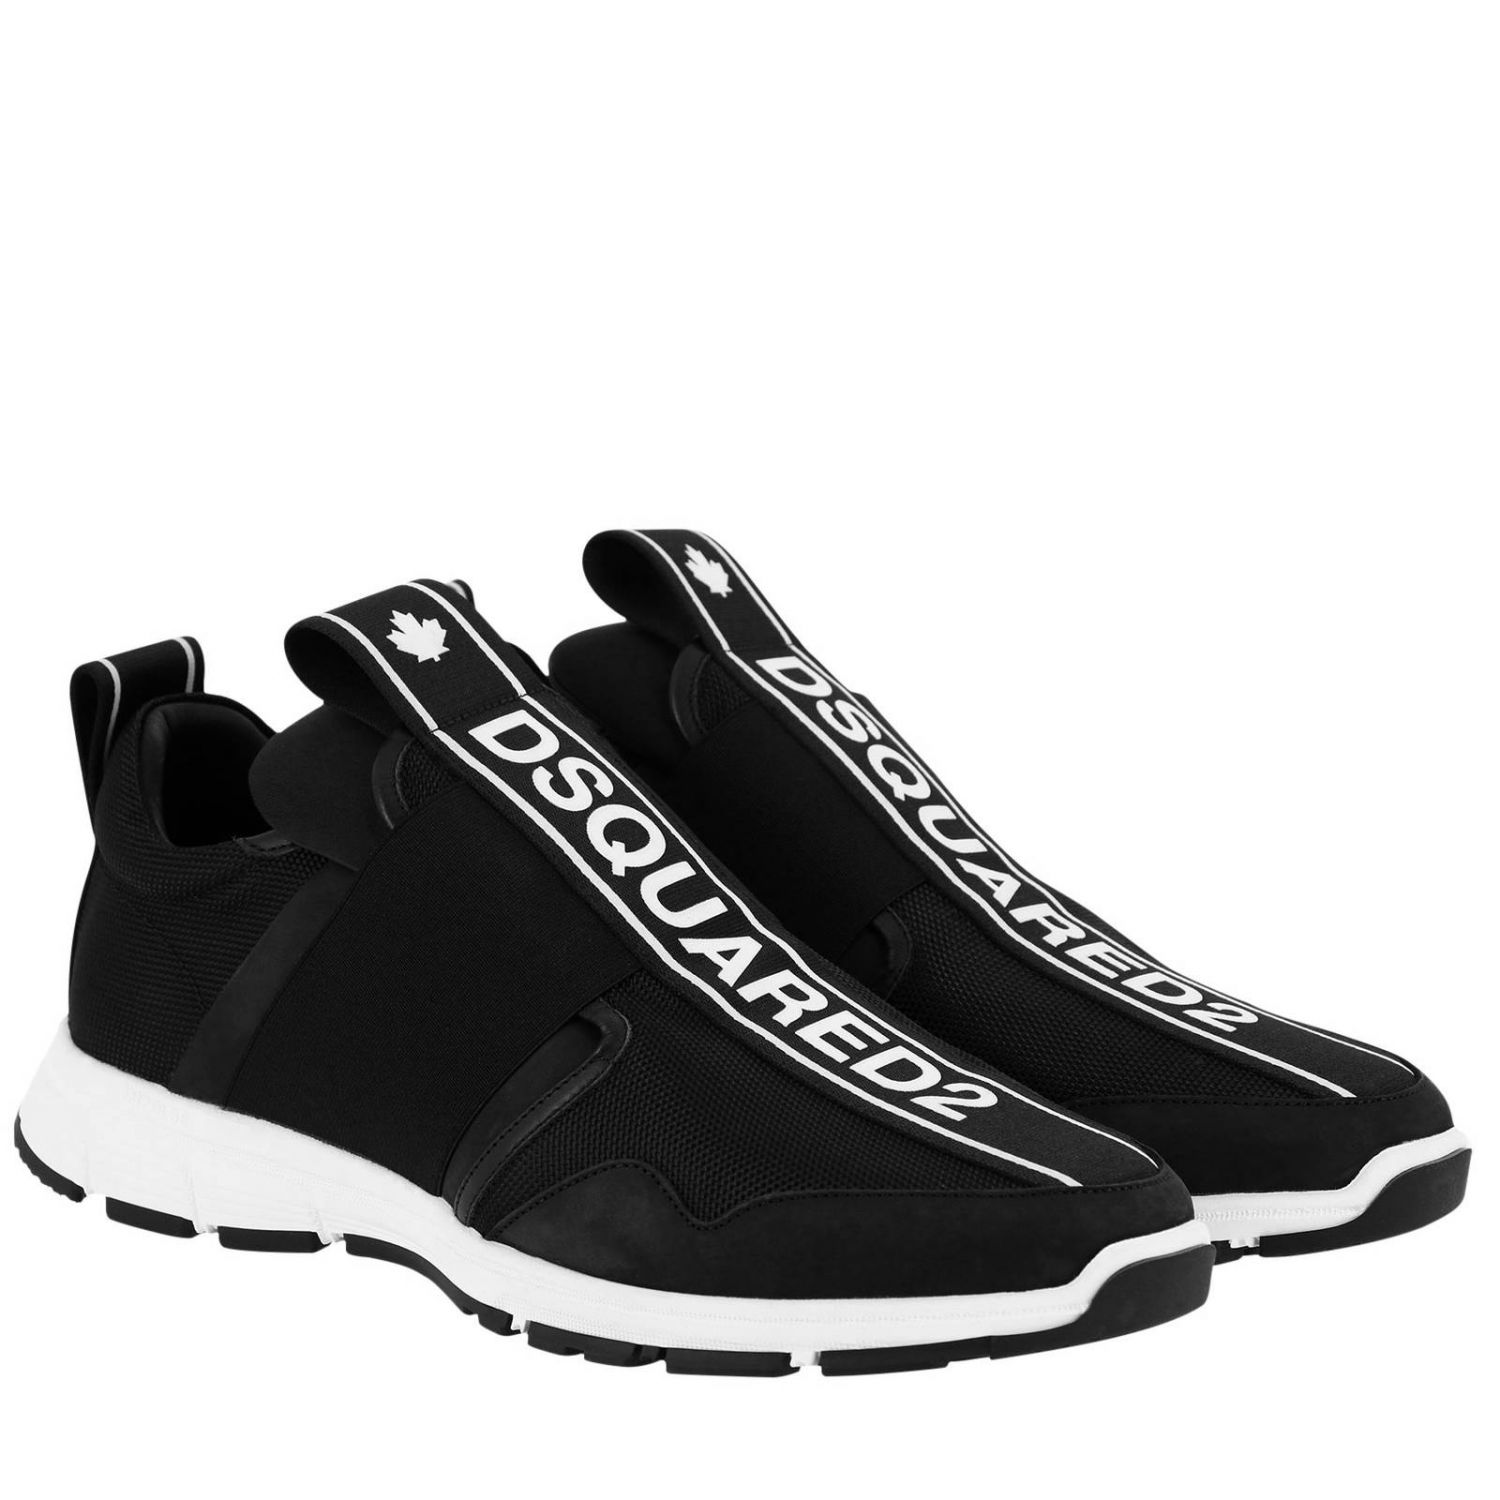 Sneakers Men Dsquared2 Trainers Dsquared2 Men Black Trainers Dsquared2 Snm00272 Giglio Uk